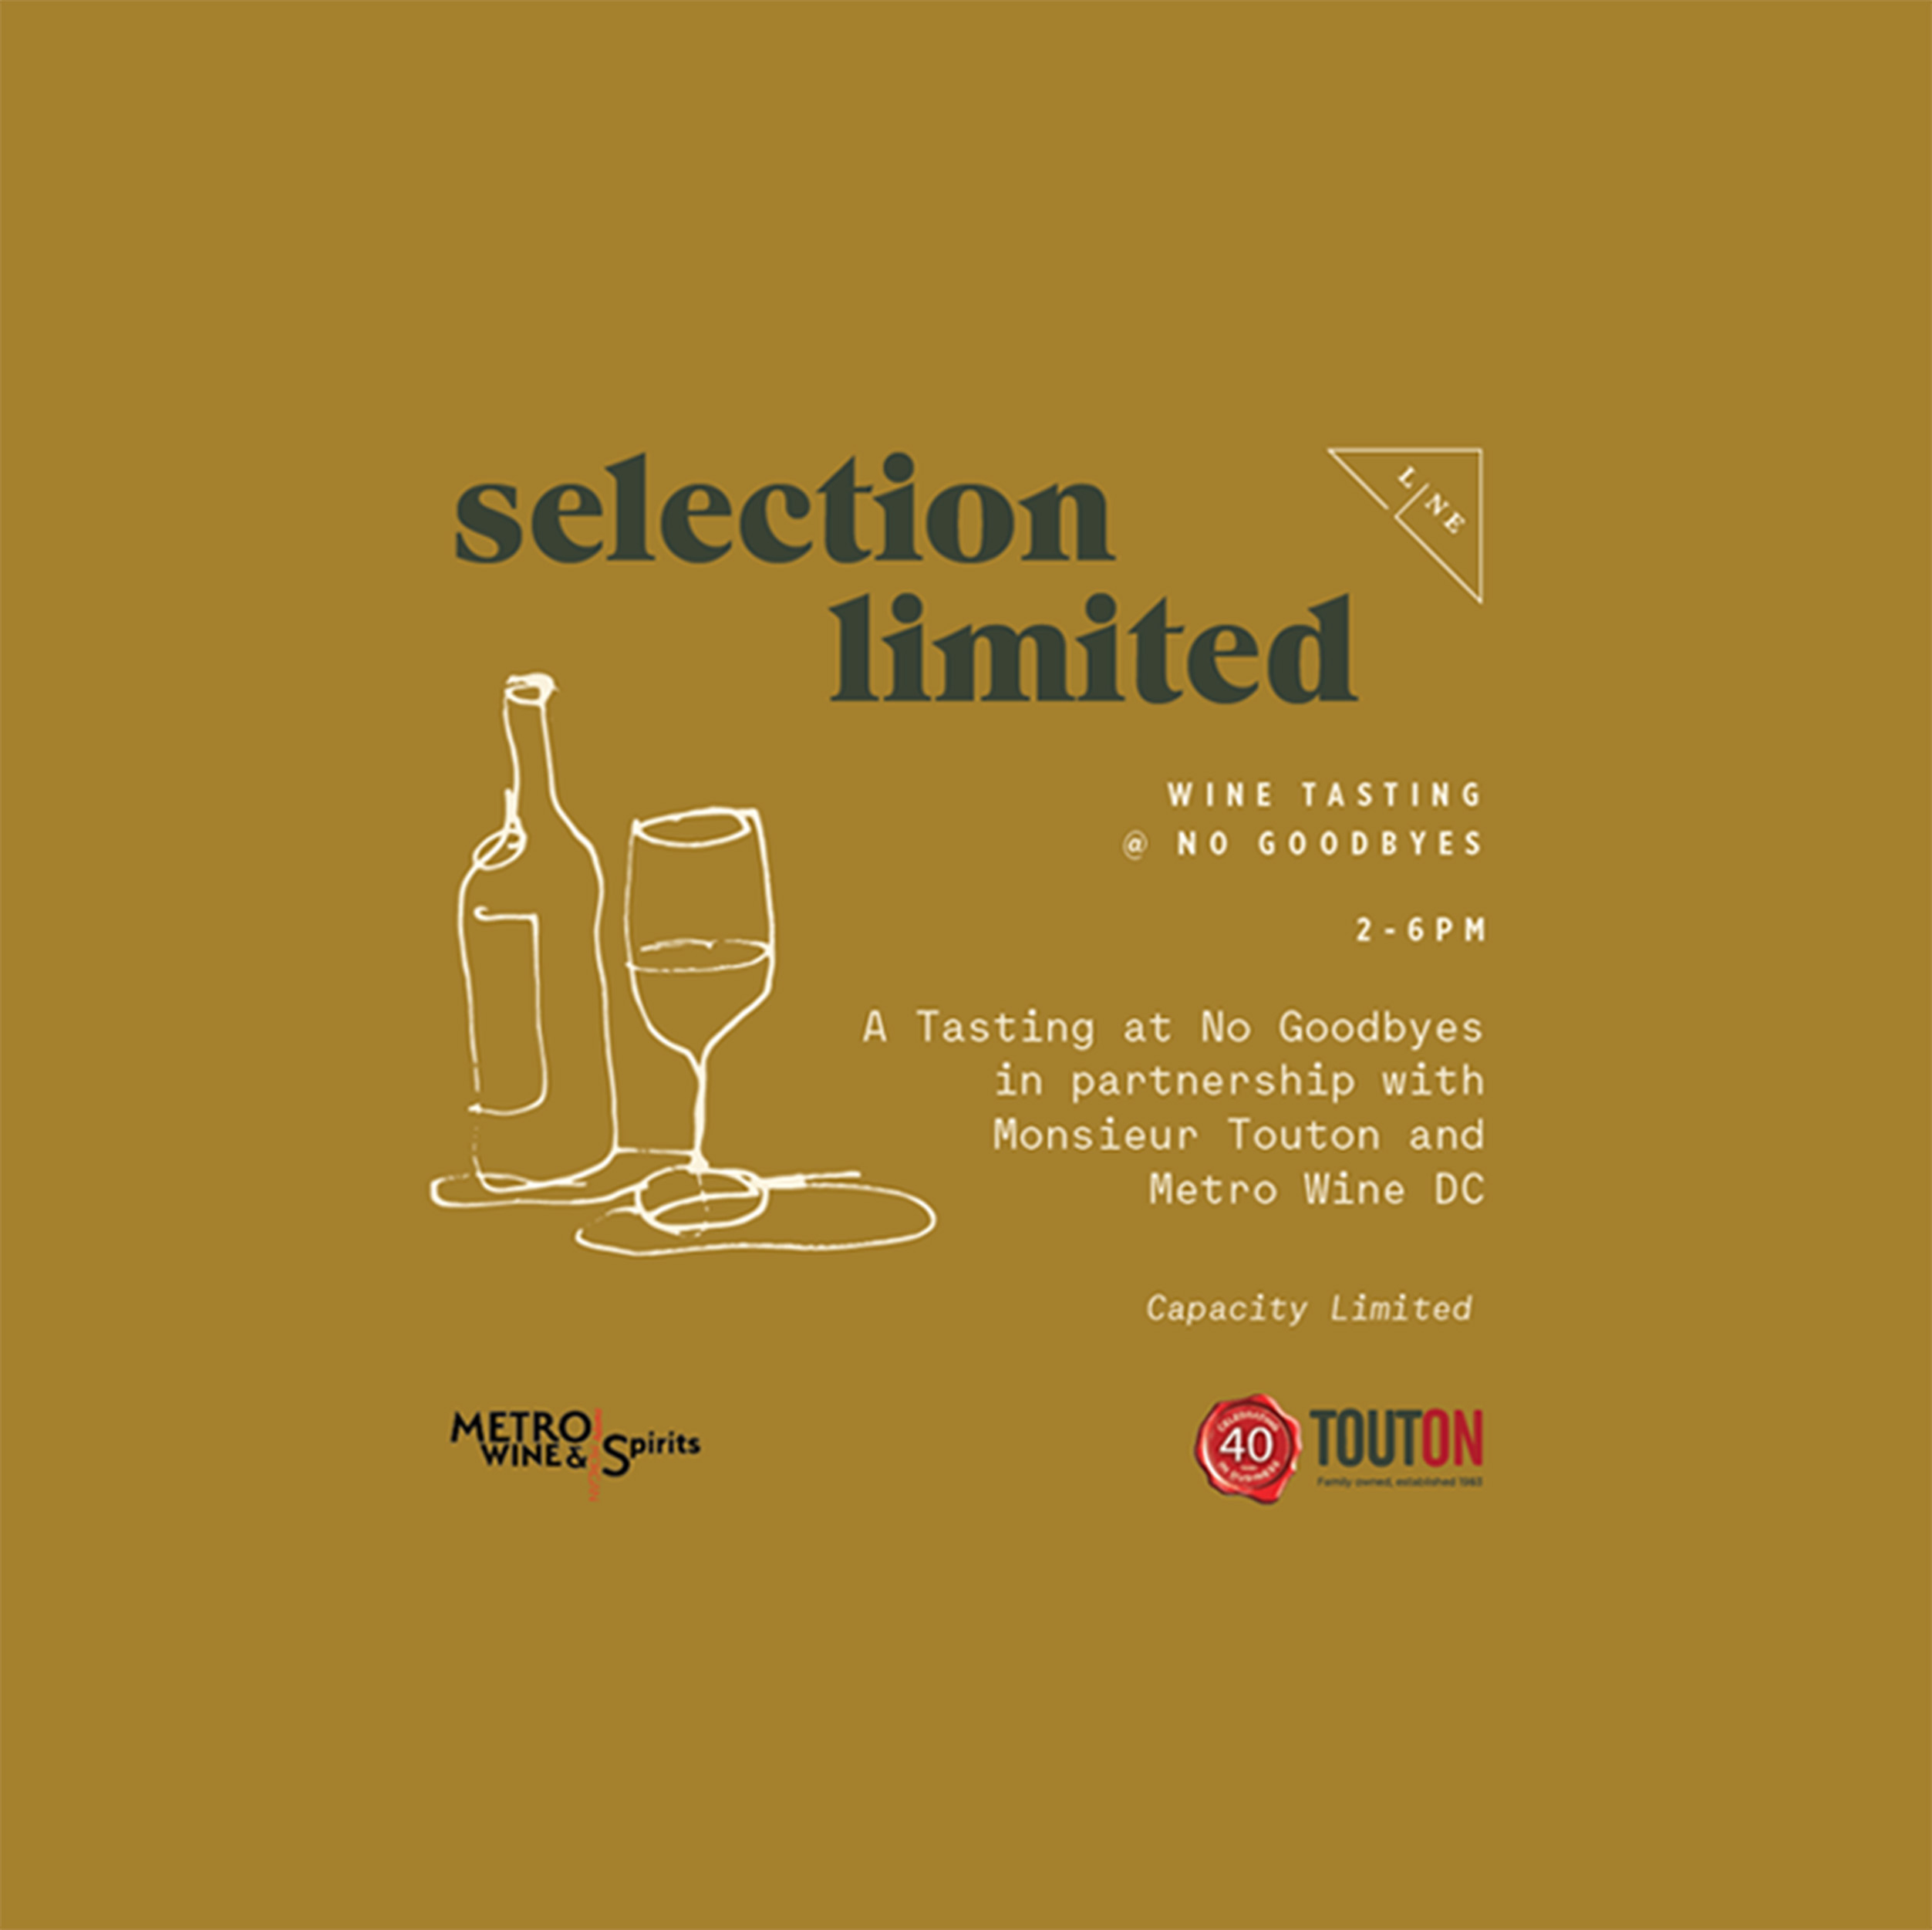 A poster for Selection Limited: Wine Tasting at No Goodbyes, in partnership with Monsieur Toutono and Metro Wine DC